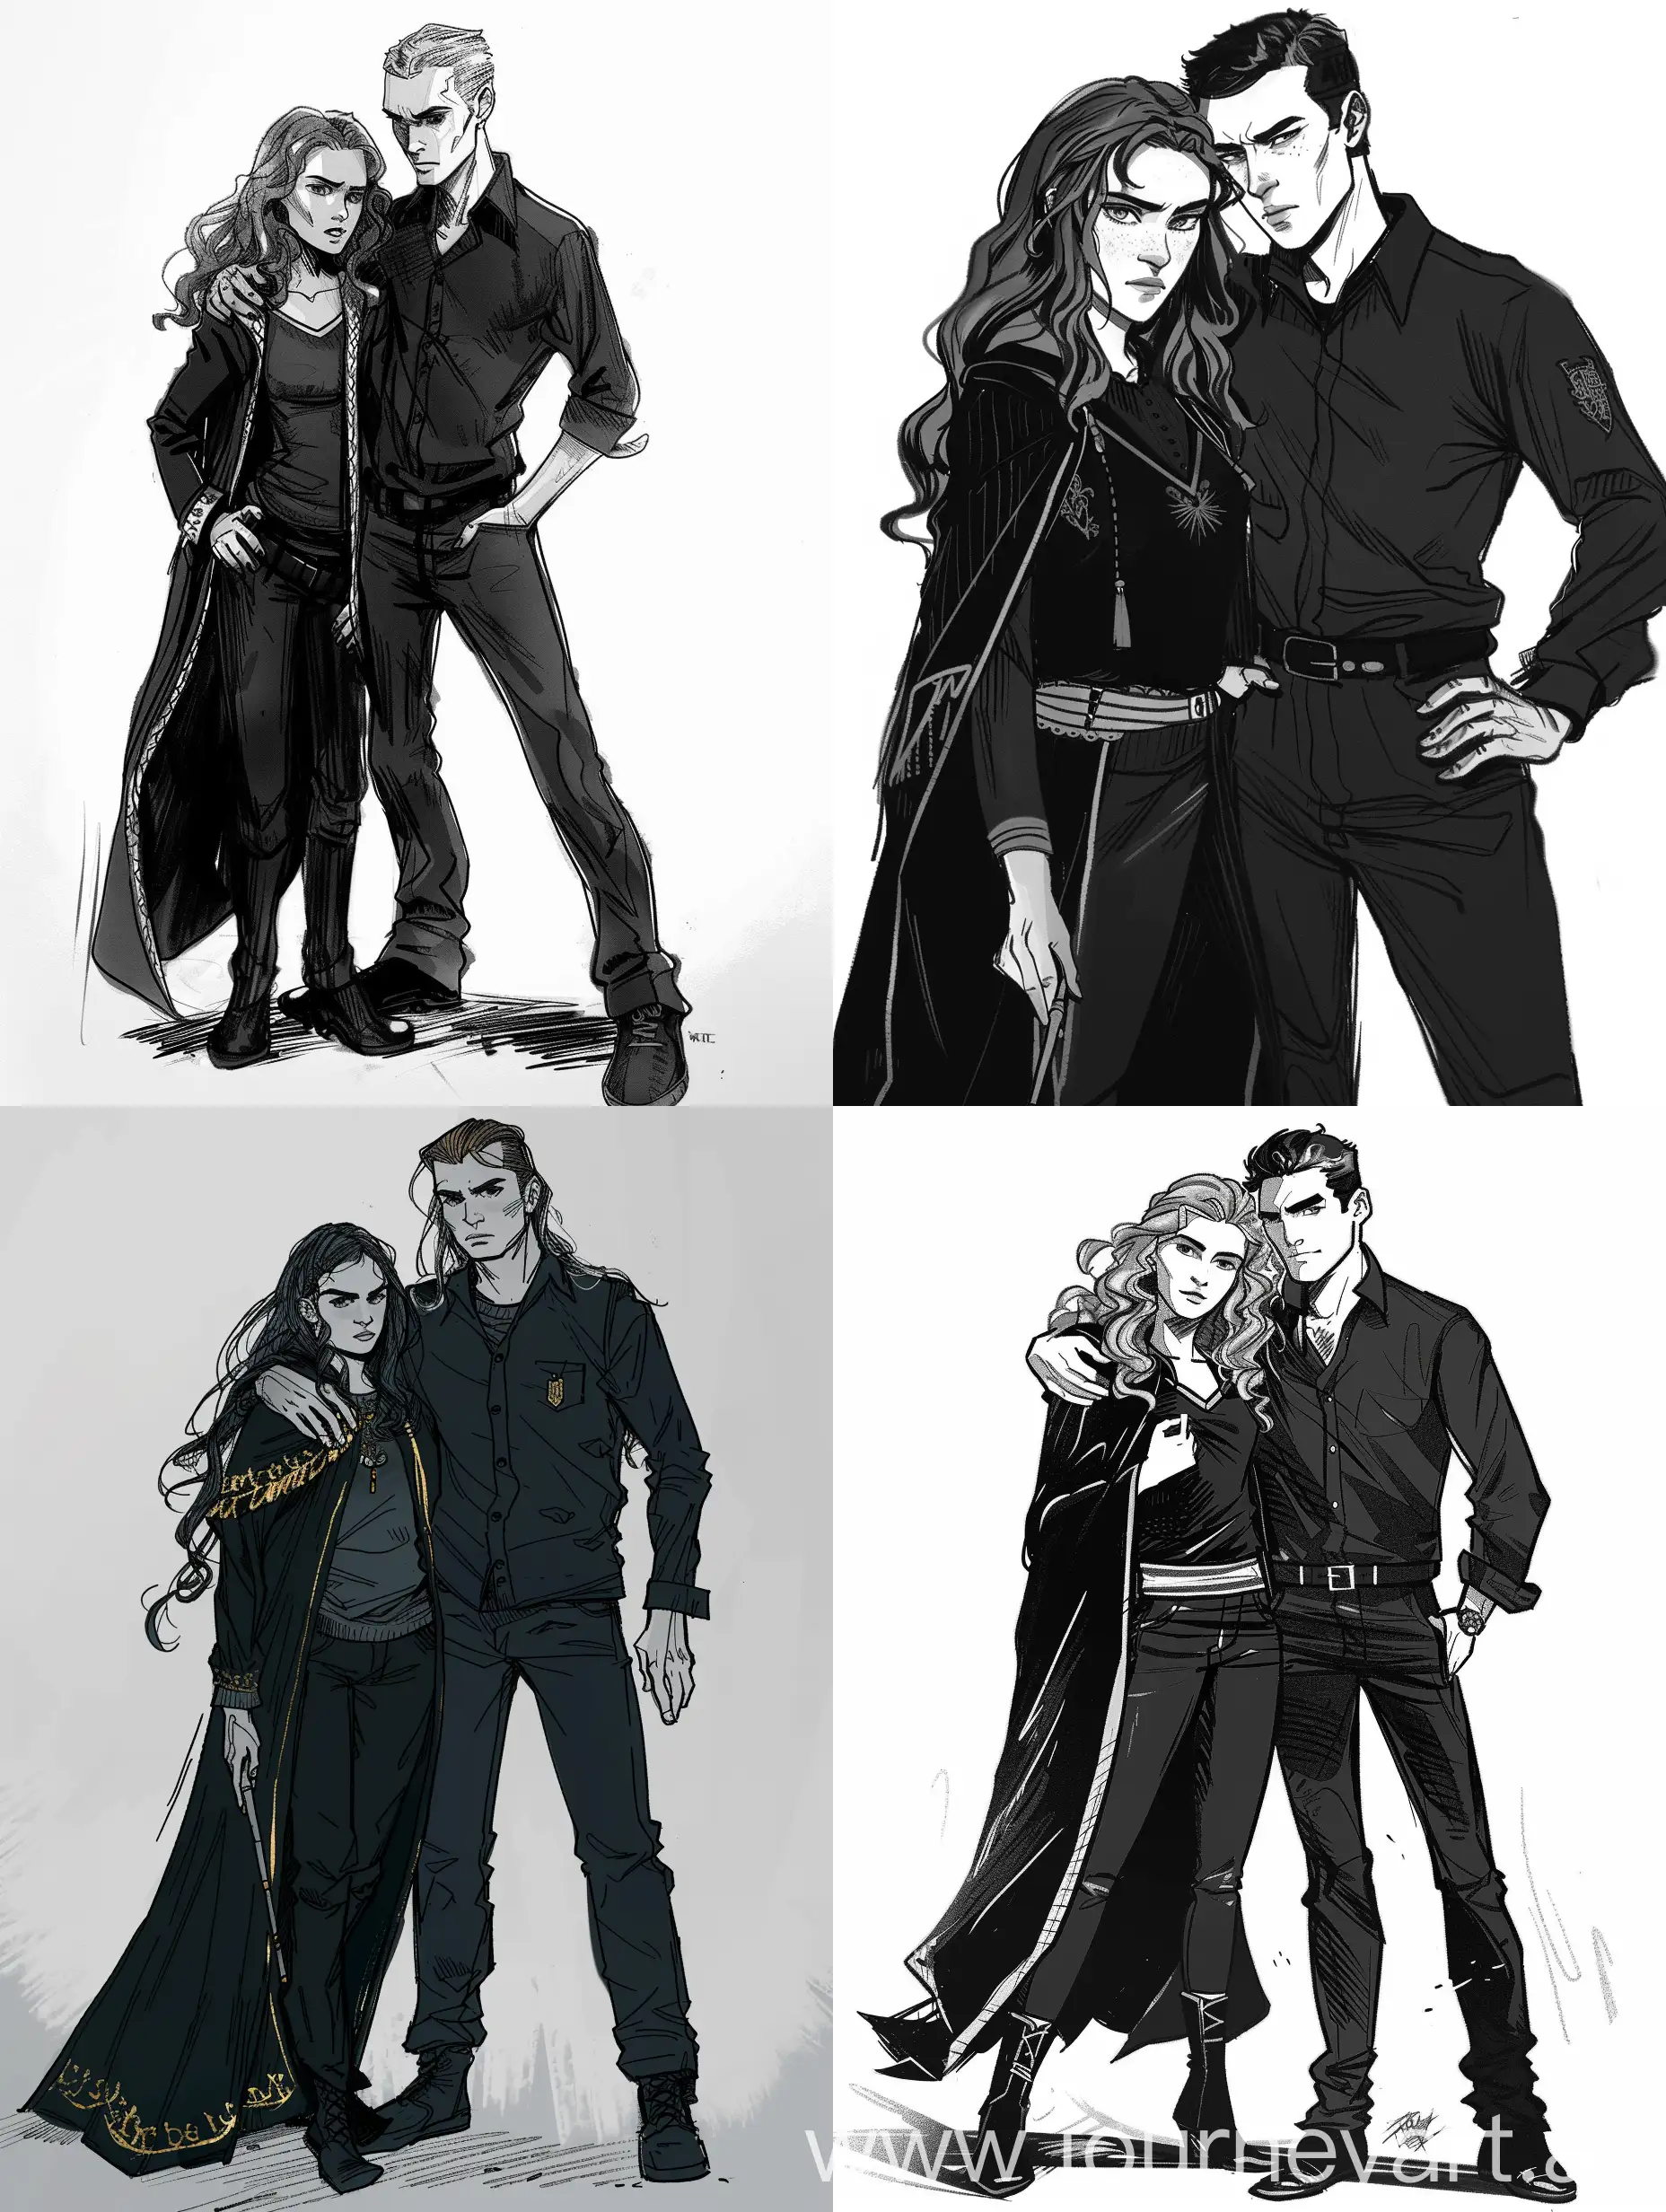 Hermione and Draco standing close together. He could have his hand on her back or shoulder or simply be standing close by. 
Hermione might look kind of defiant, like she's ready to take on an enemy. She might be wearing dark clothing including a black cloak with gold trim around the edge (the cloak is special in the story). Her hair could be mostly down with the sides braided back. Draco might be serious or smirking, dressed in dark pants and something like a button-down shirt or sweater. (He could have a wand but she doesn't). His attitude might be challenging, like he's daring someone to test them, or protective.